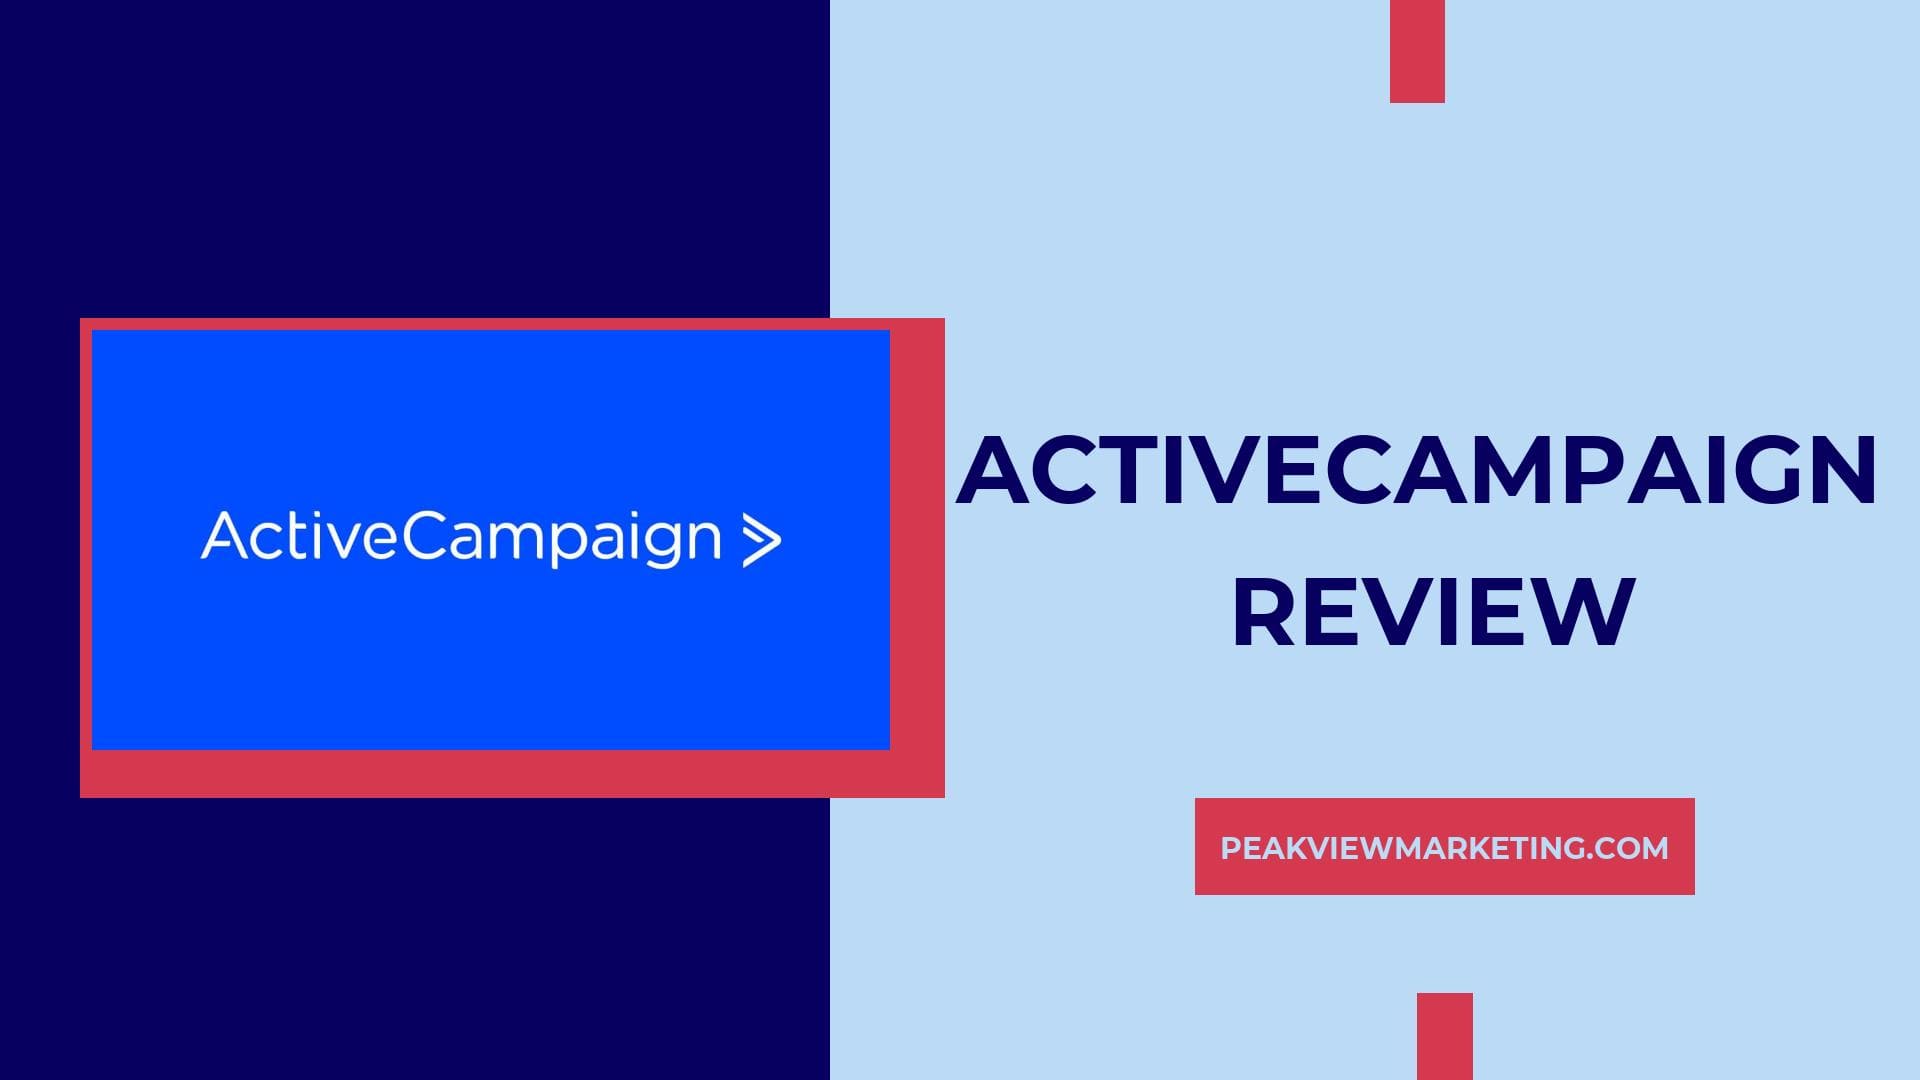 ActiveCampaign Review Image